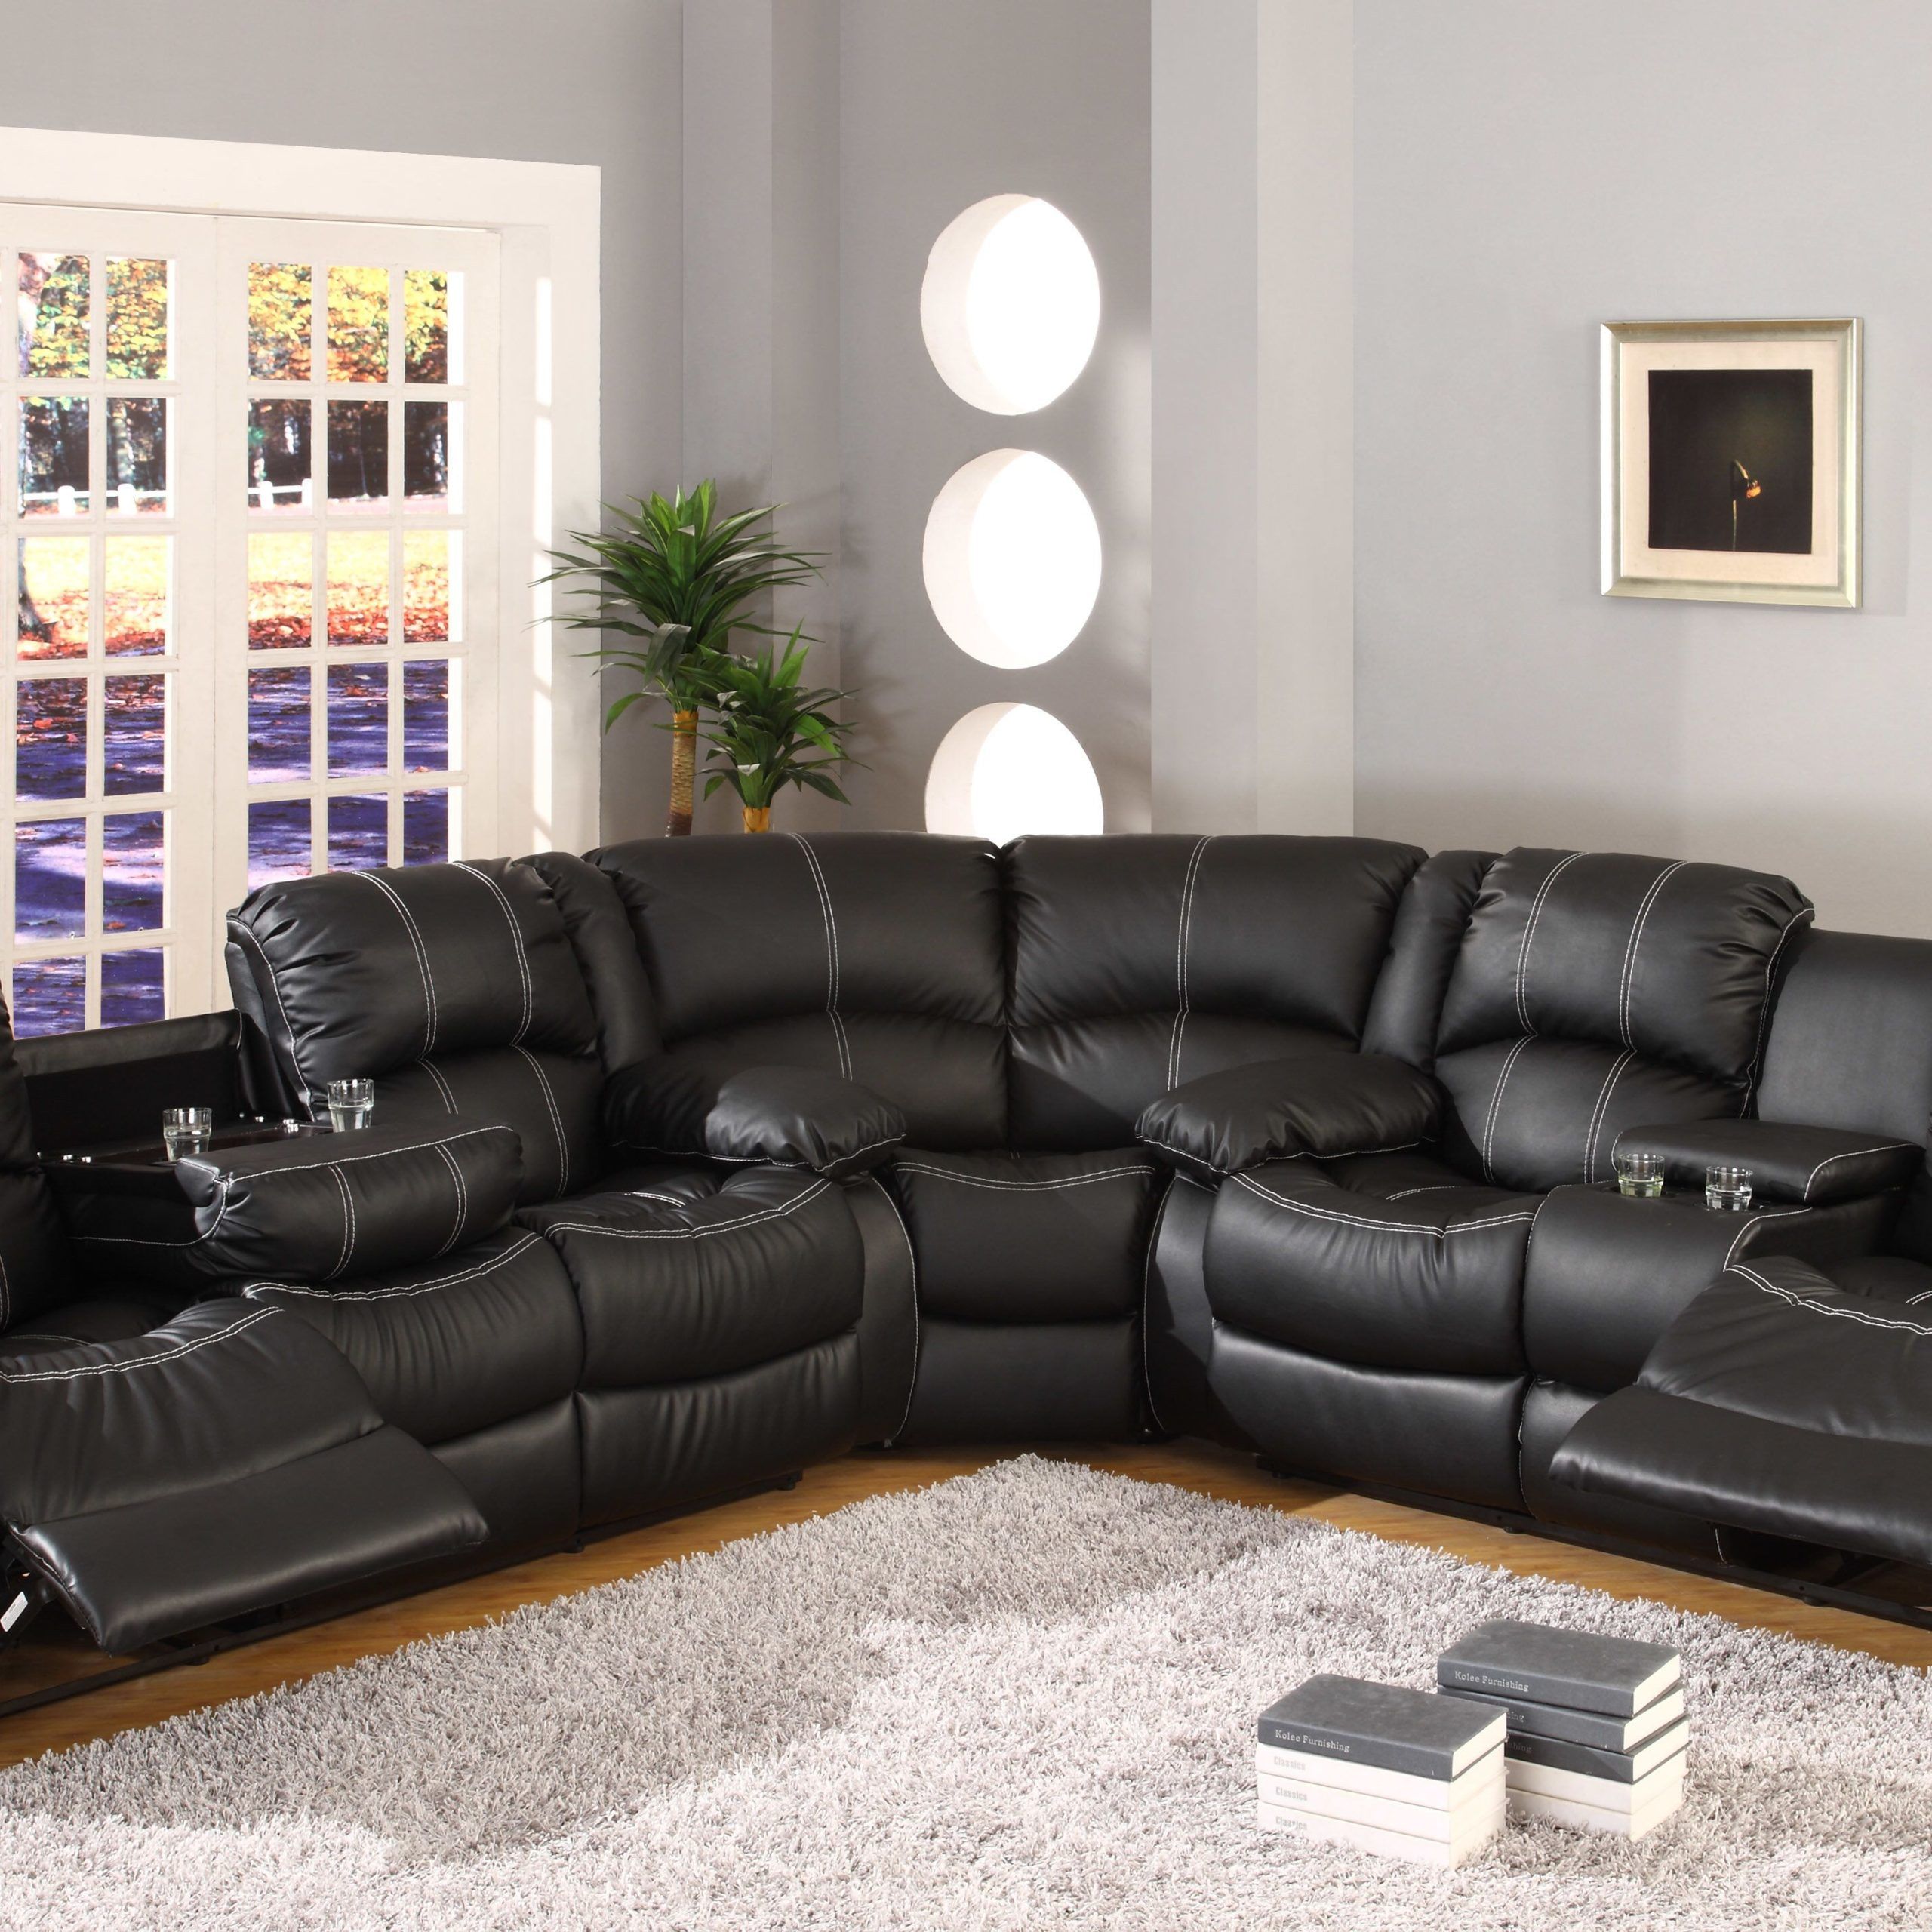 Hattie Comfort Reclining Sectional | Sectional Sofa With Recliner With Regard To Right Facing Black Sofas (View 5 of 20)